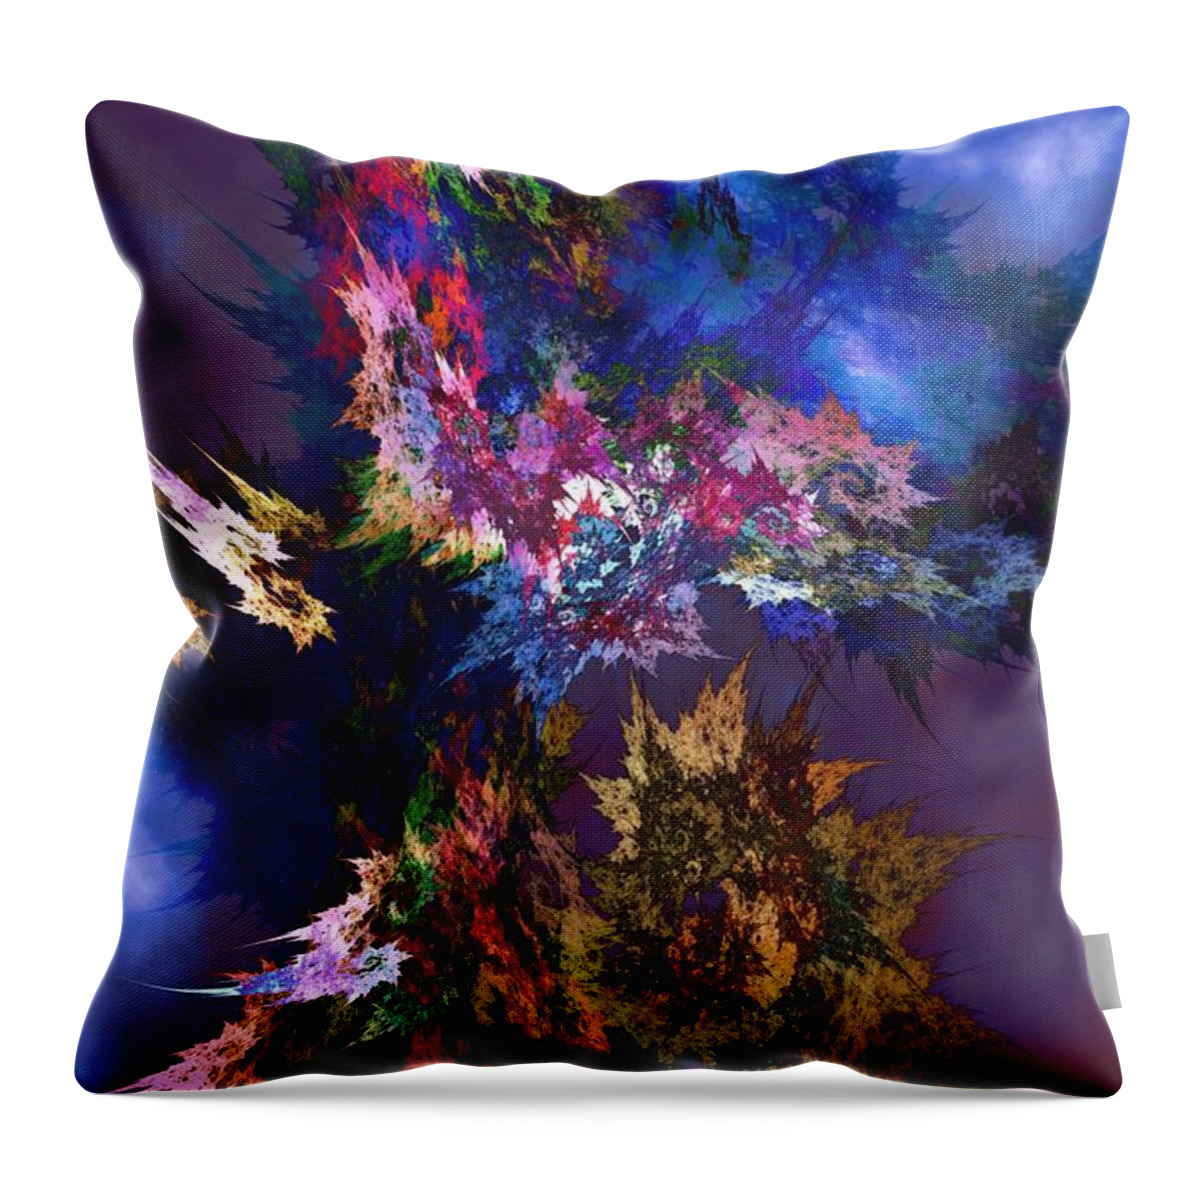 Blue Throw Pillow featuring the digital art Building New Landscapes by Elizabeth McTaggart